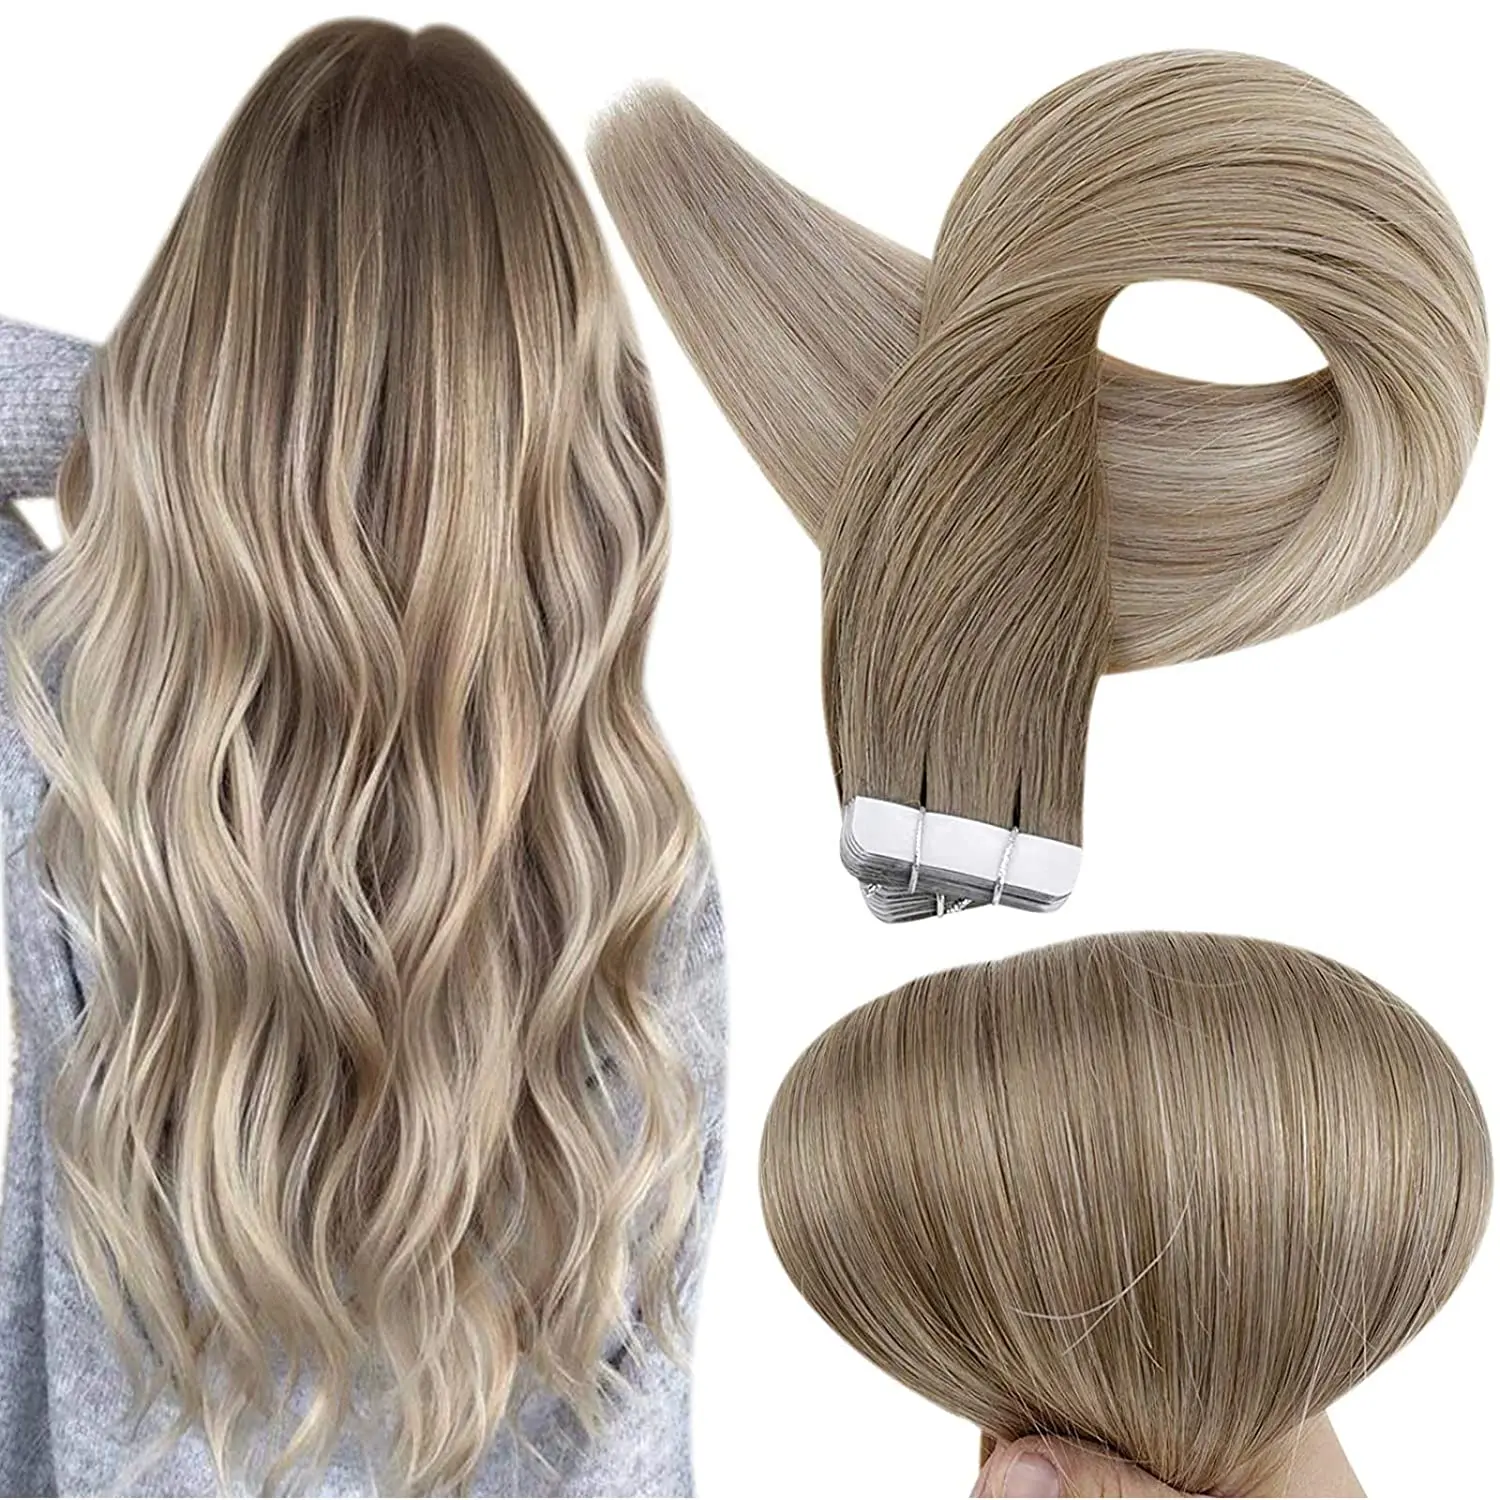 

Full Shine 14-24" Silky Straight Remy Human Hair Extensions Light Brown to Platinum Blonde Hair Extensions Tape in50g